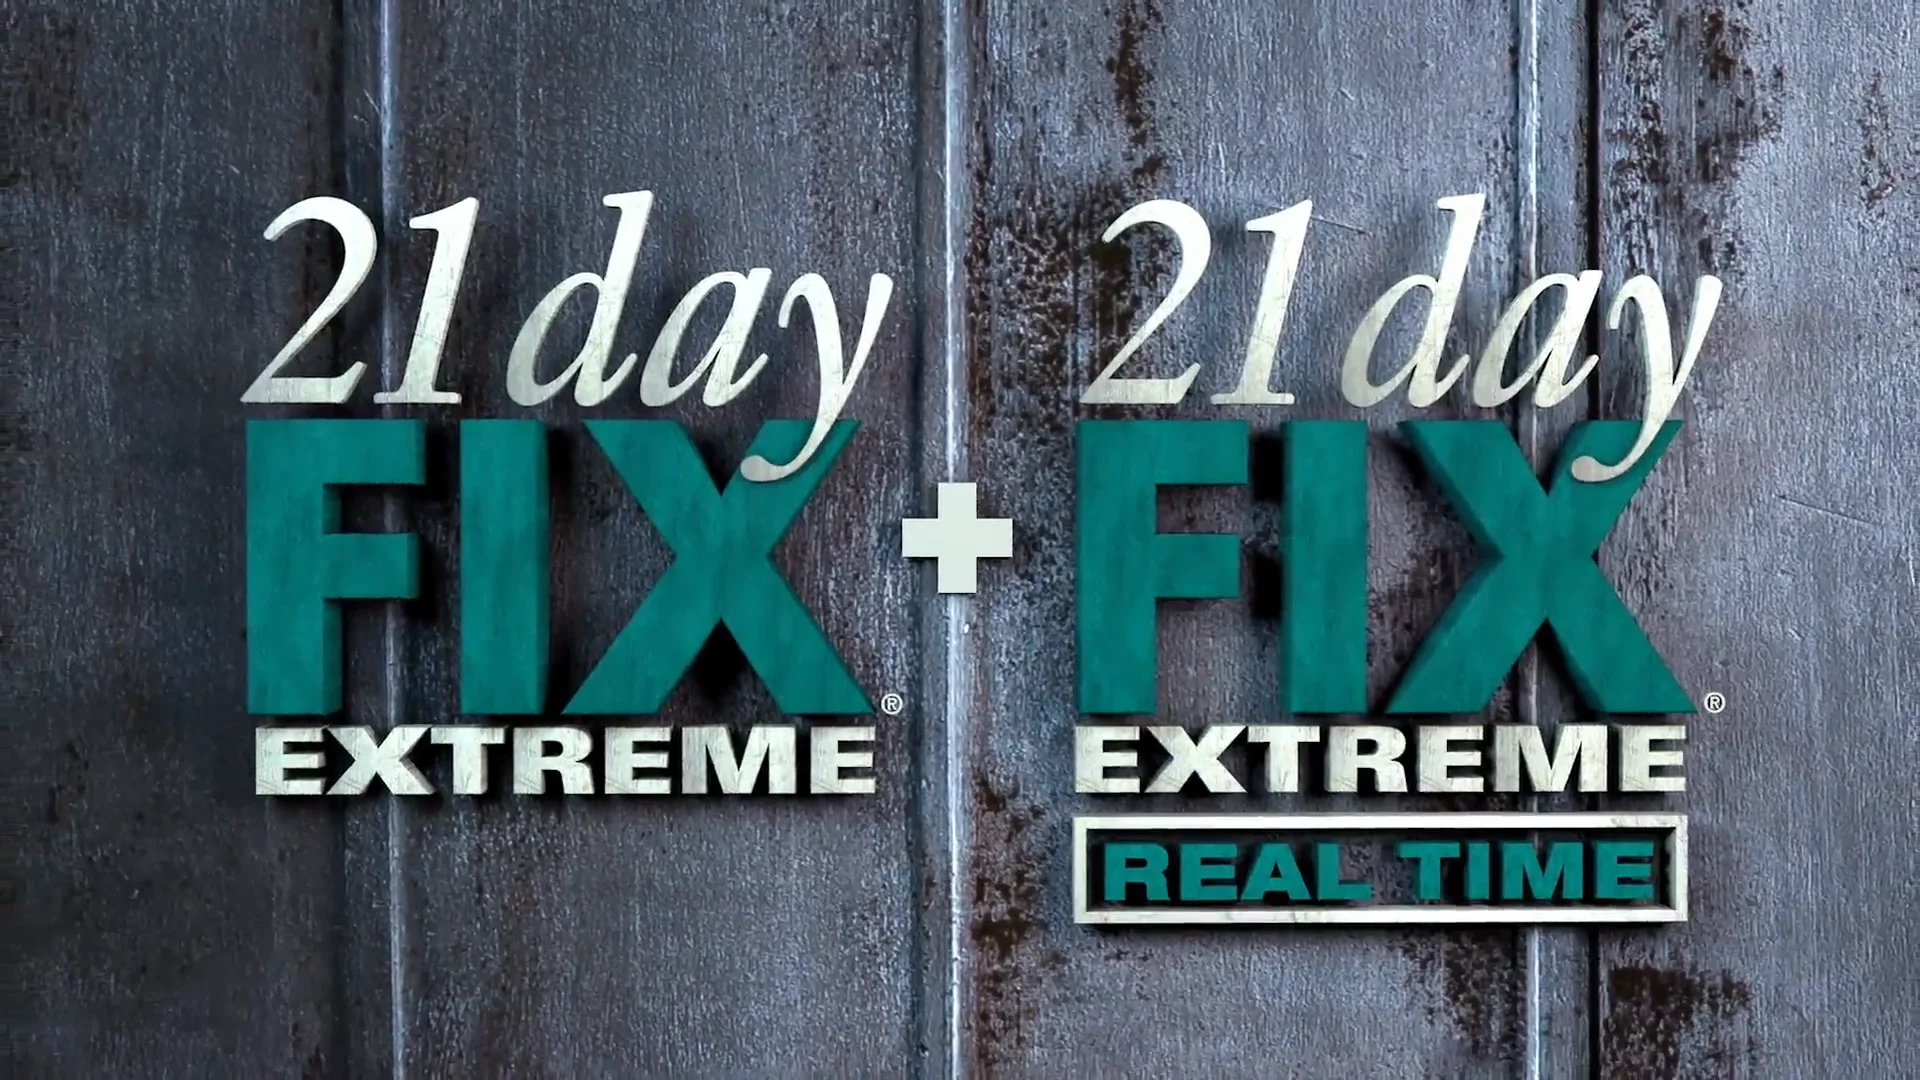 Introducing the 21 Day Fix Super Block on Vimeo